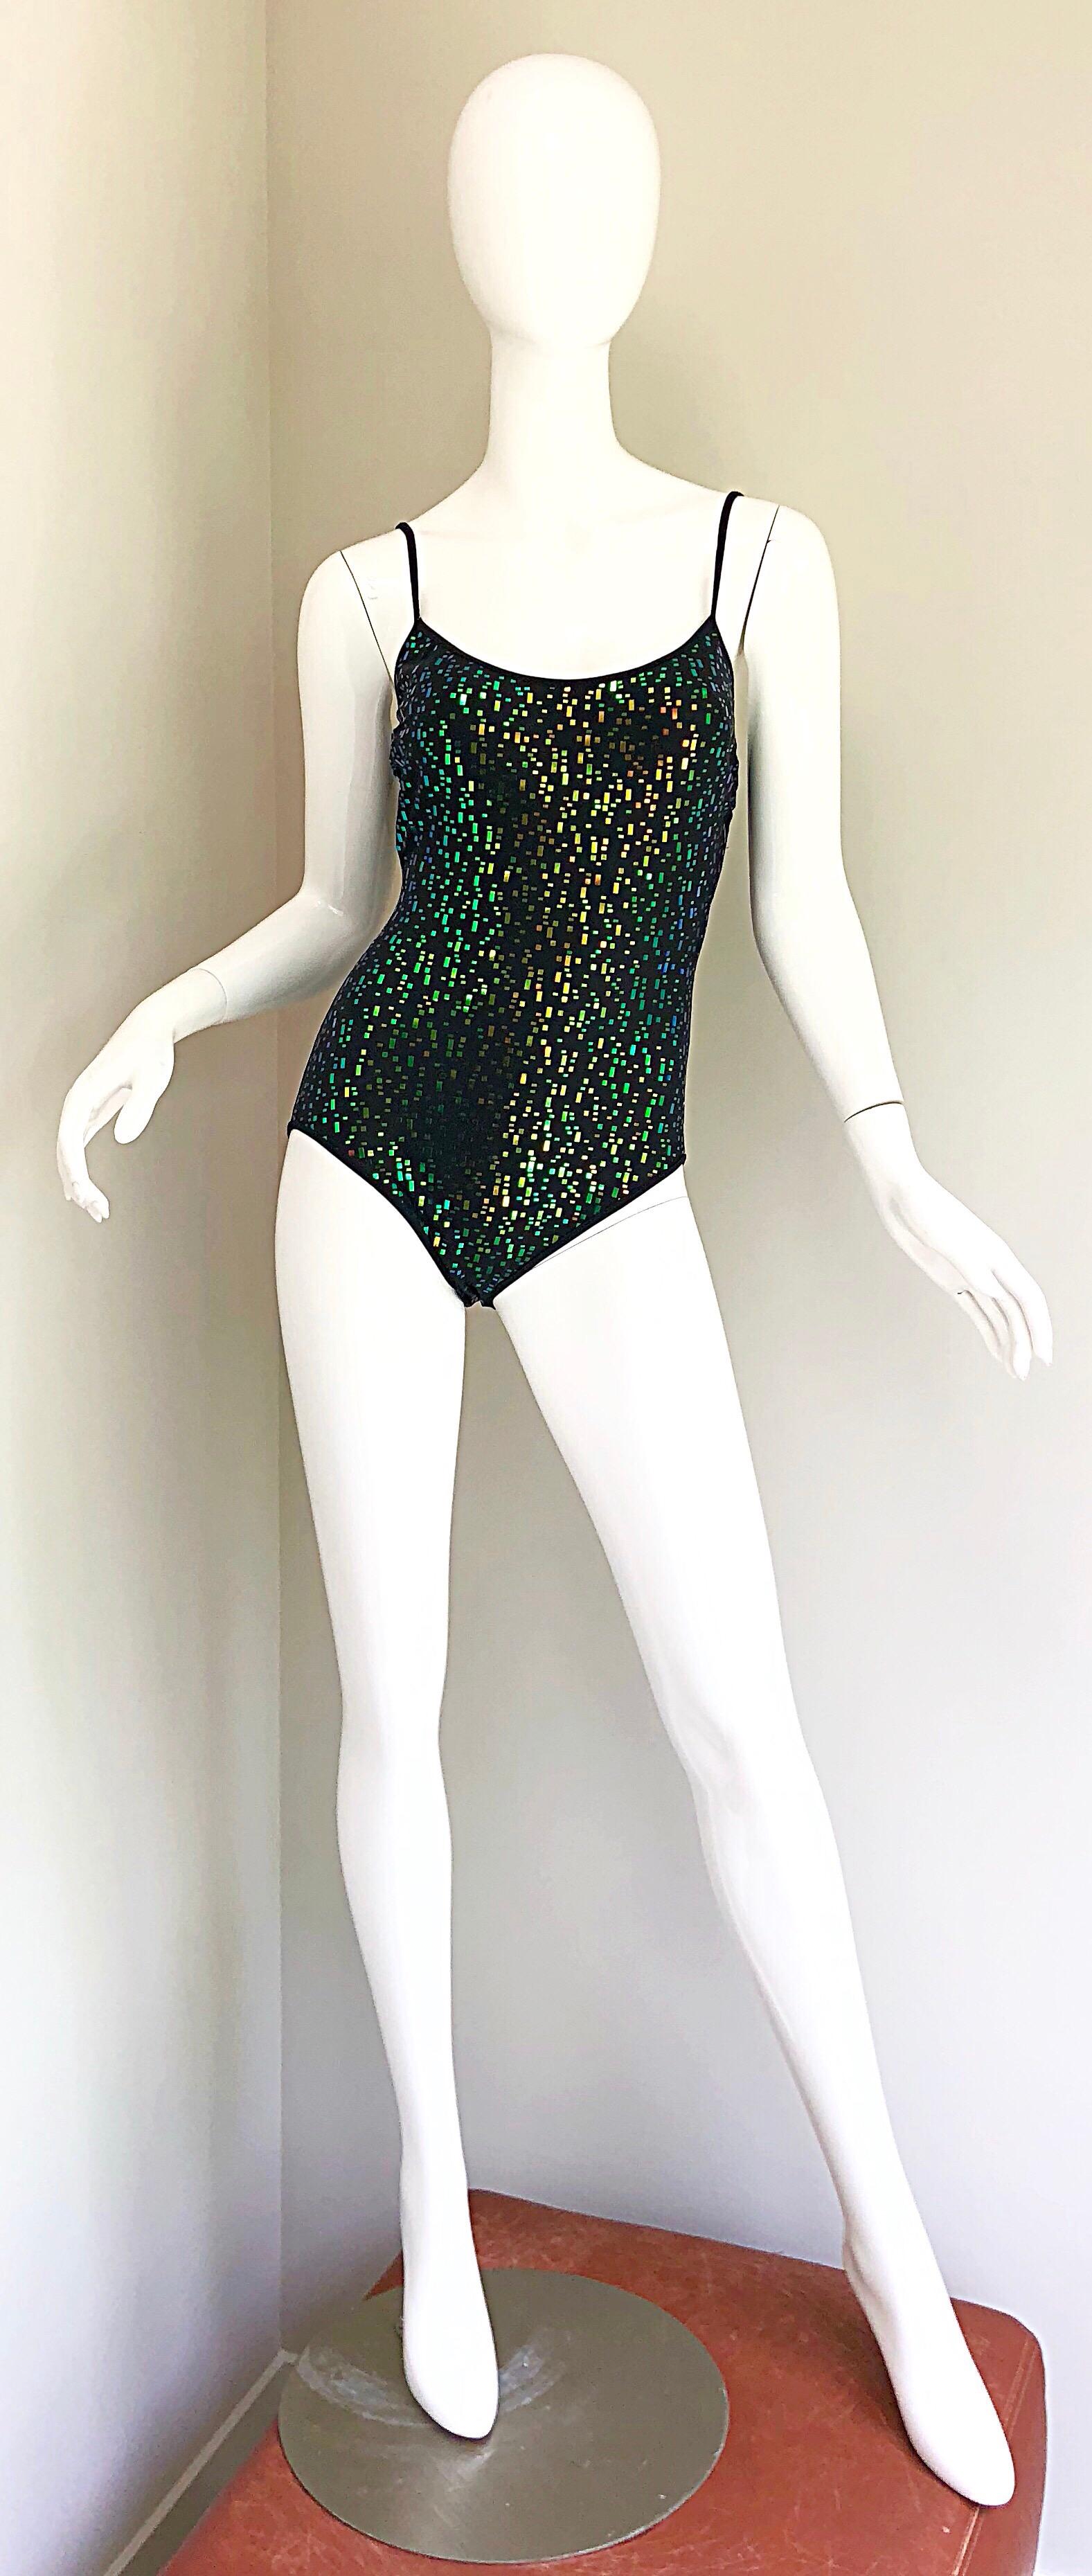 Sexy vintage 1990s deadstock (new w/ tags) OSCAR DE LA RENTA black sequin one piece swimsuit or bodysuit! Features iridescent blue and green sequins throughout. Solid black flattering back. Simply step into this rare gem, and go. Great for the